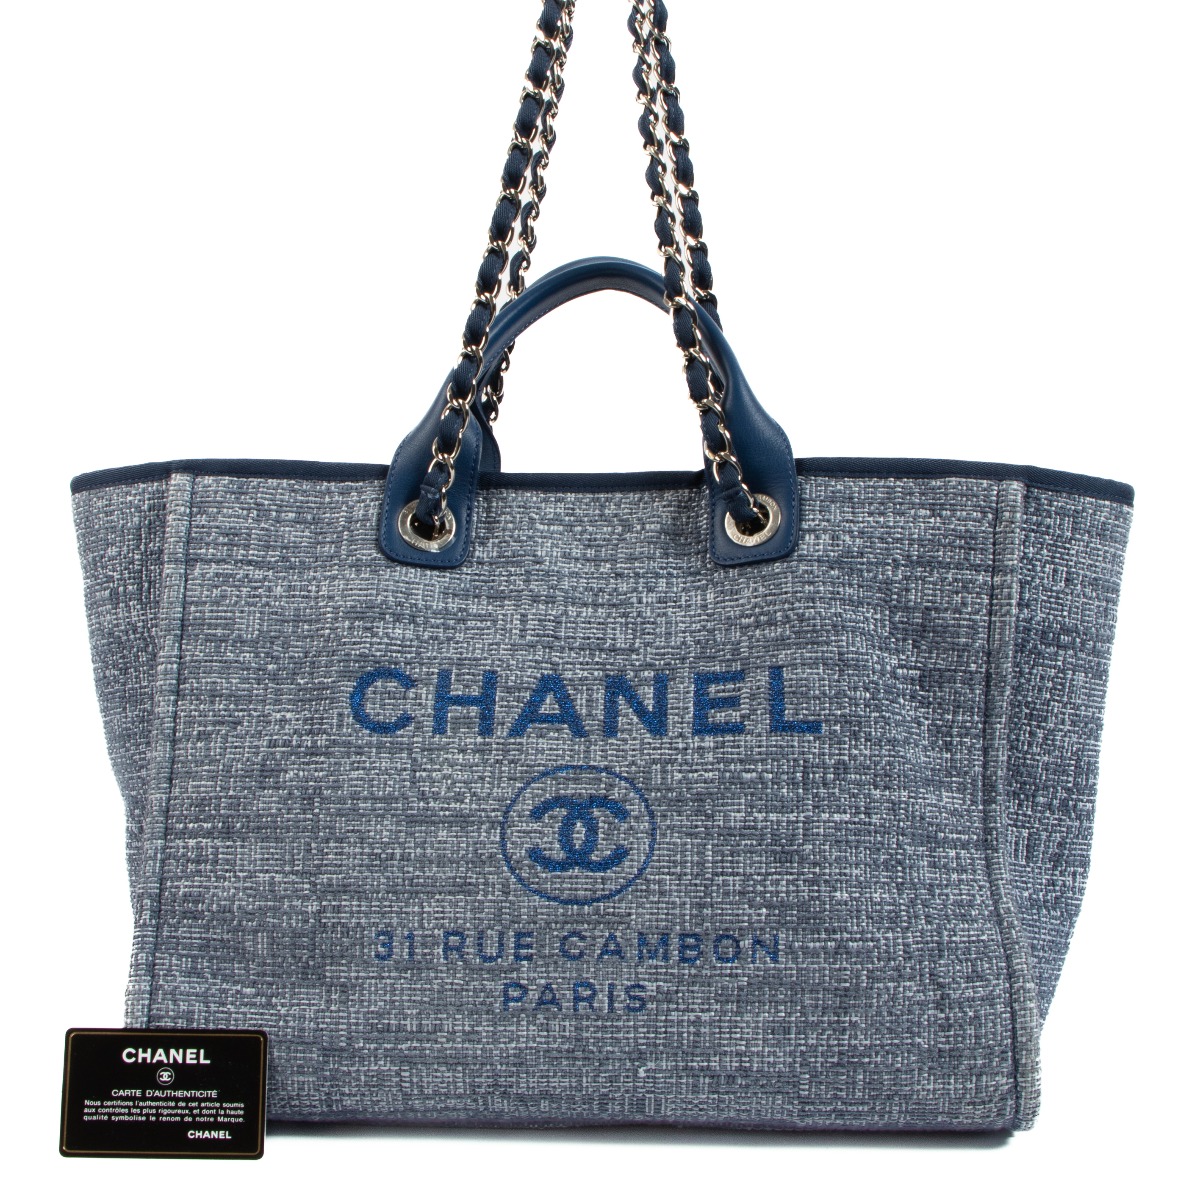 Chanel - Authenticated Deauville Handbag - Cloth Blue for Women, Never Worn